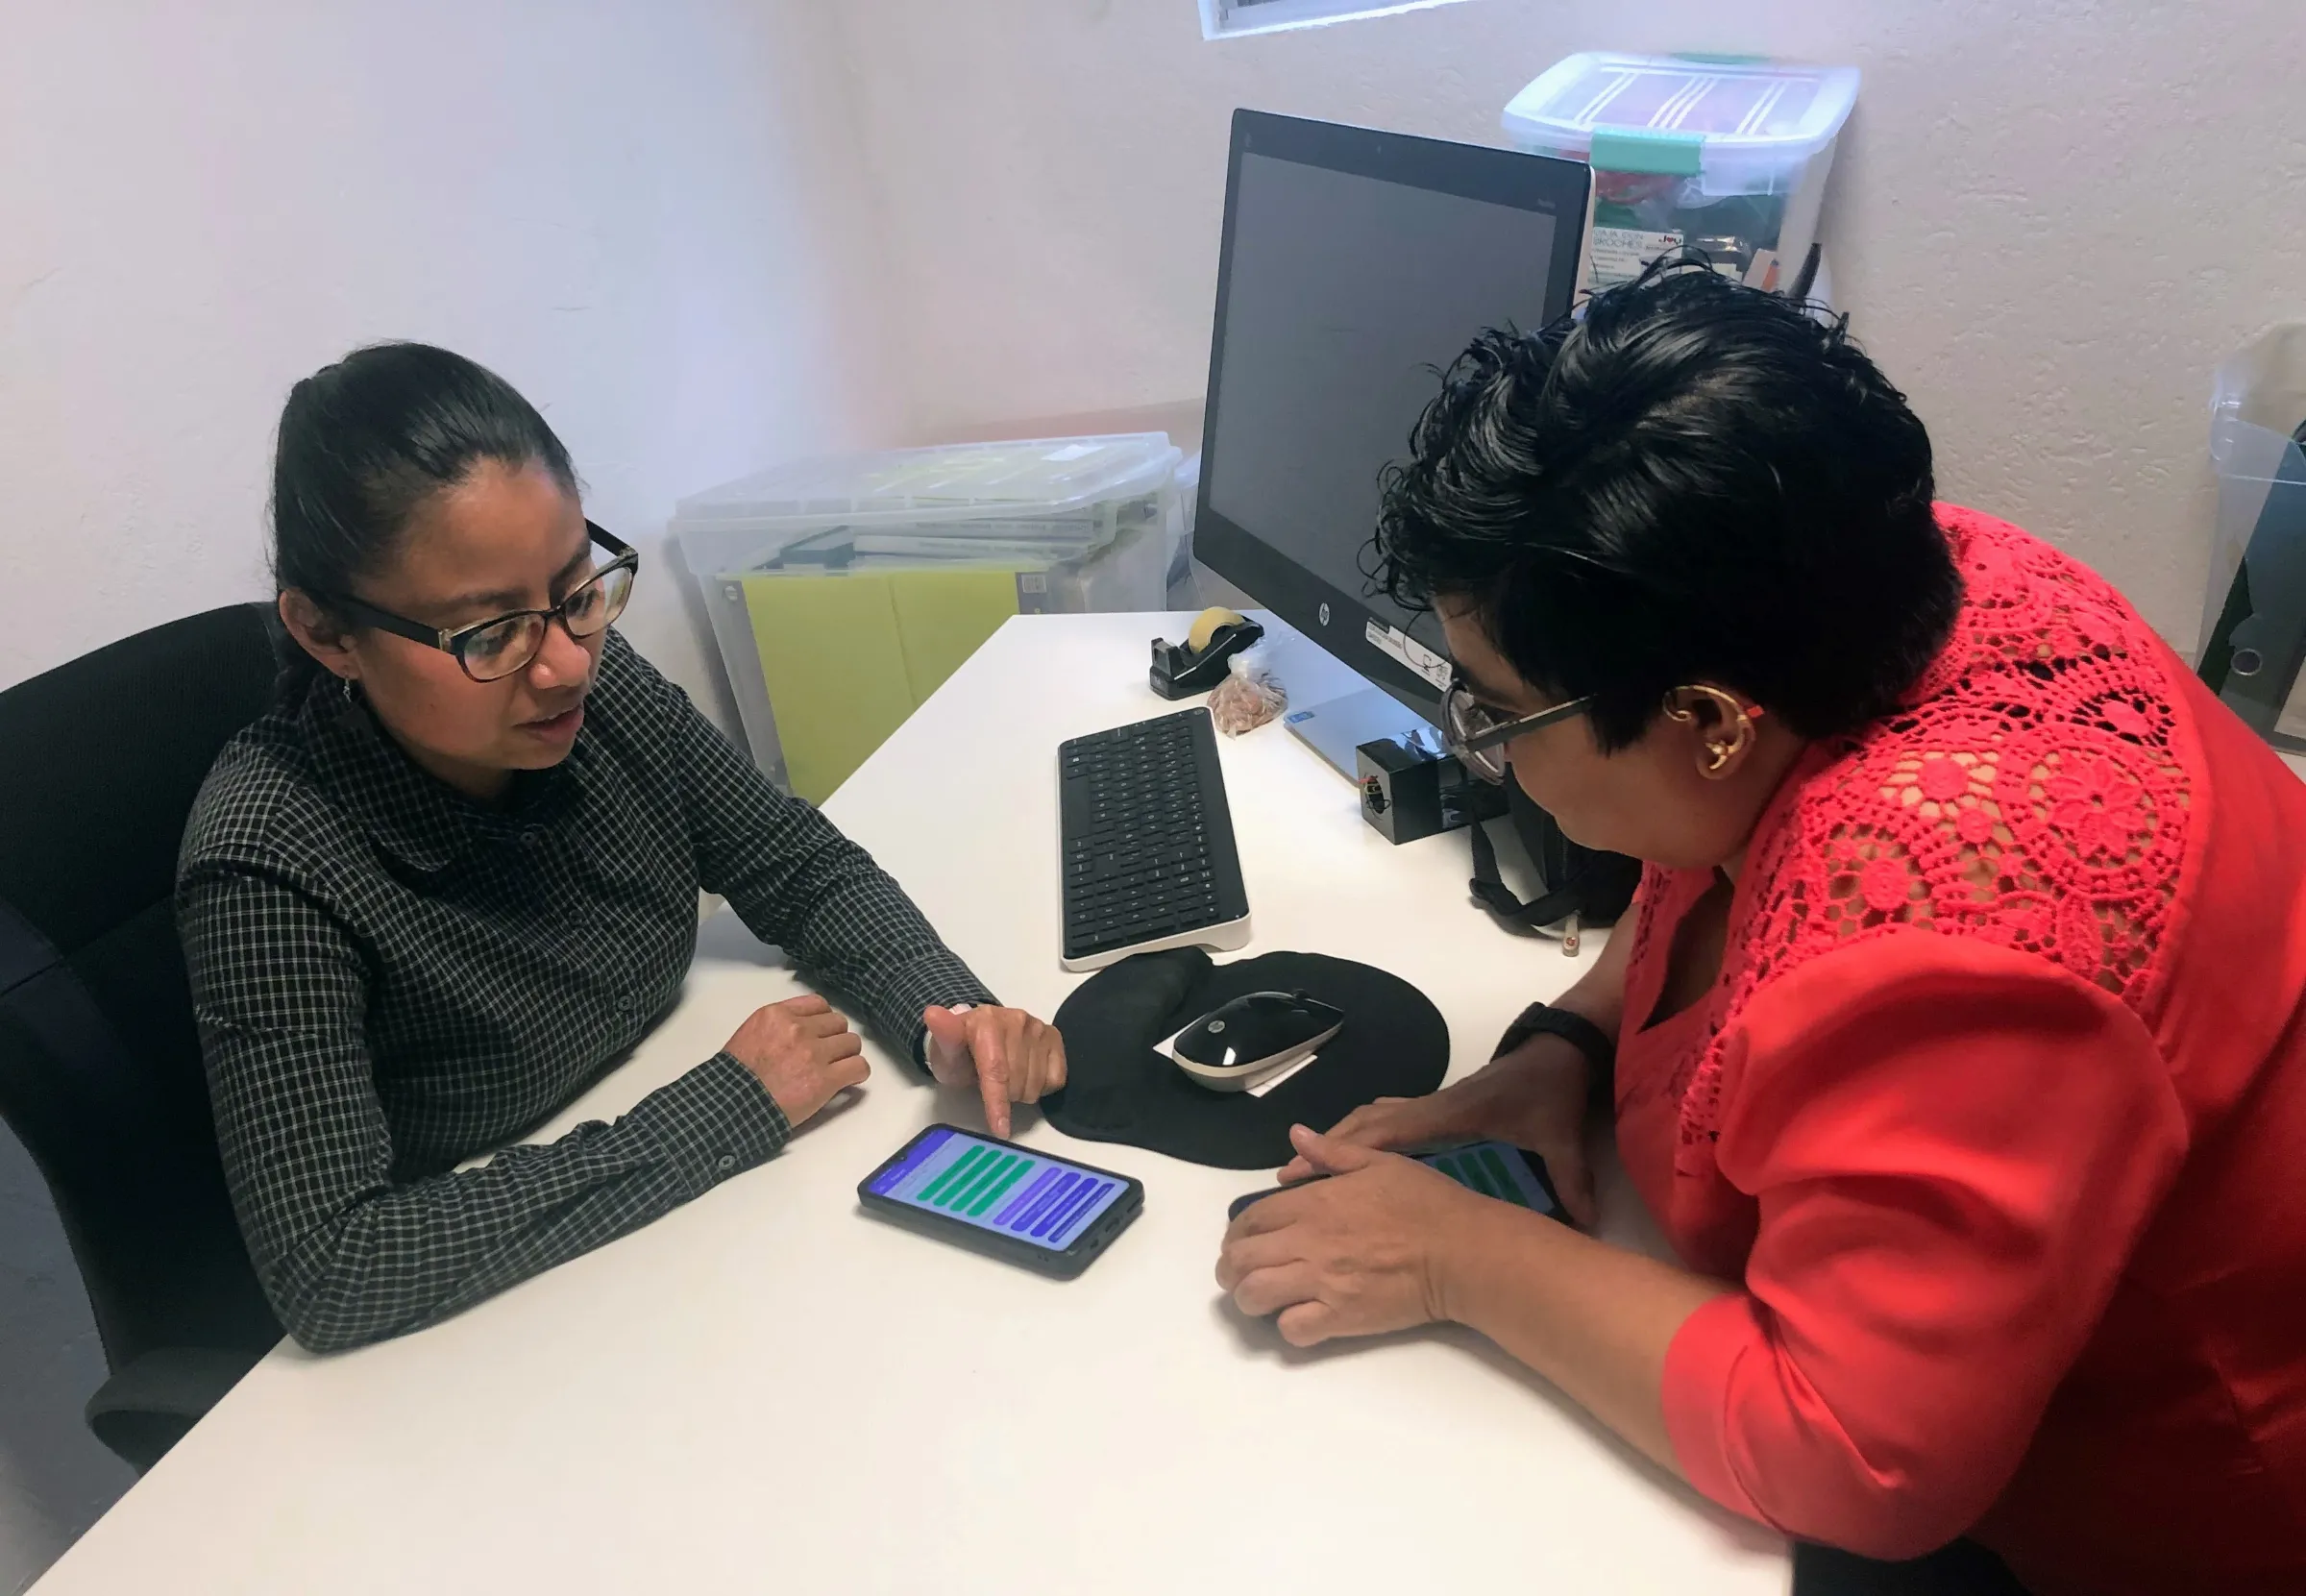 Ana Sofia Pablo and Diana Enriquez, members of nonprofit CACEH, explore the app Dignas on their phones at their office in Mexico City, August 19, 2022